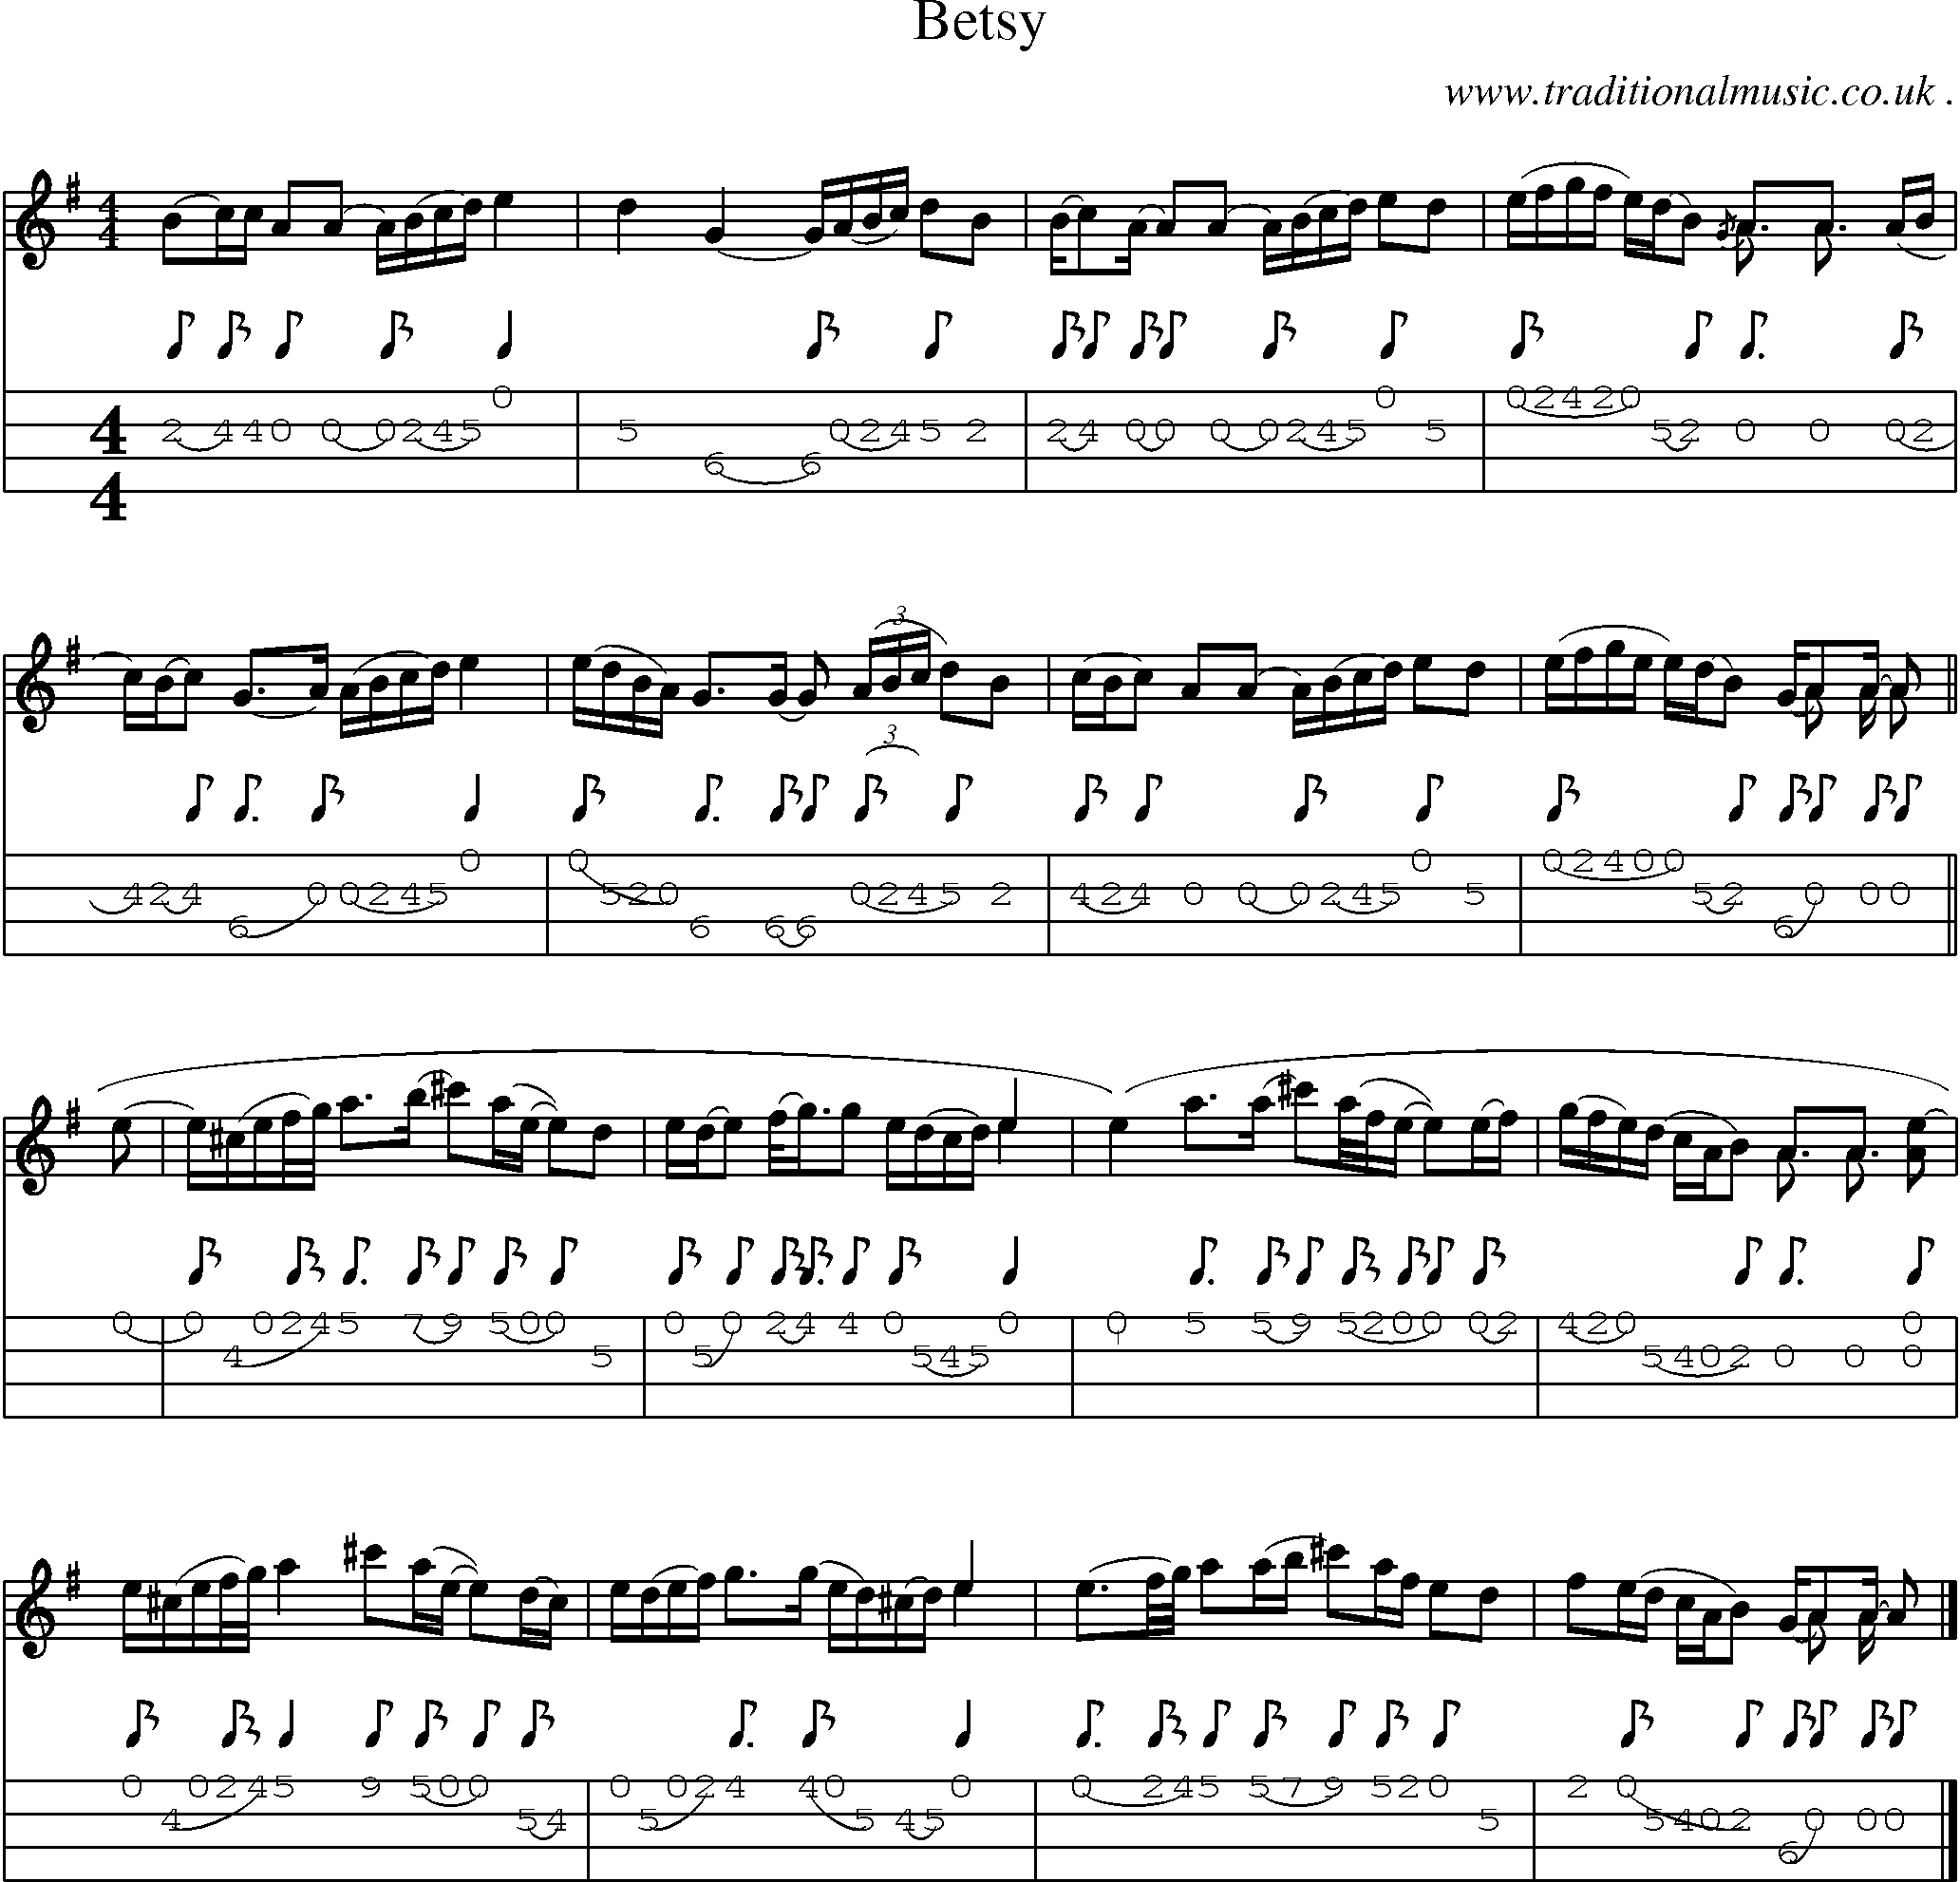 Sheet-music  score, Chords and Mandolin Tabs for Betsy